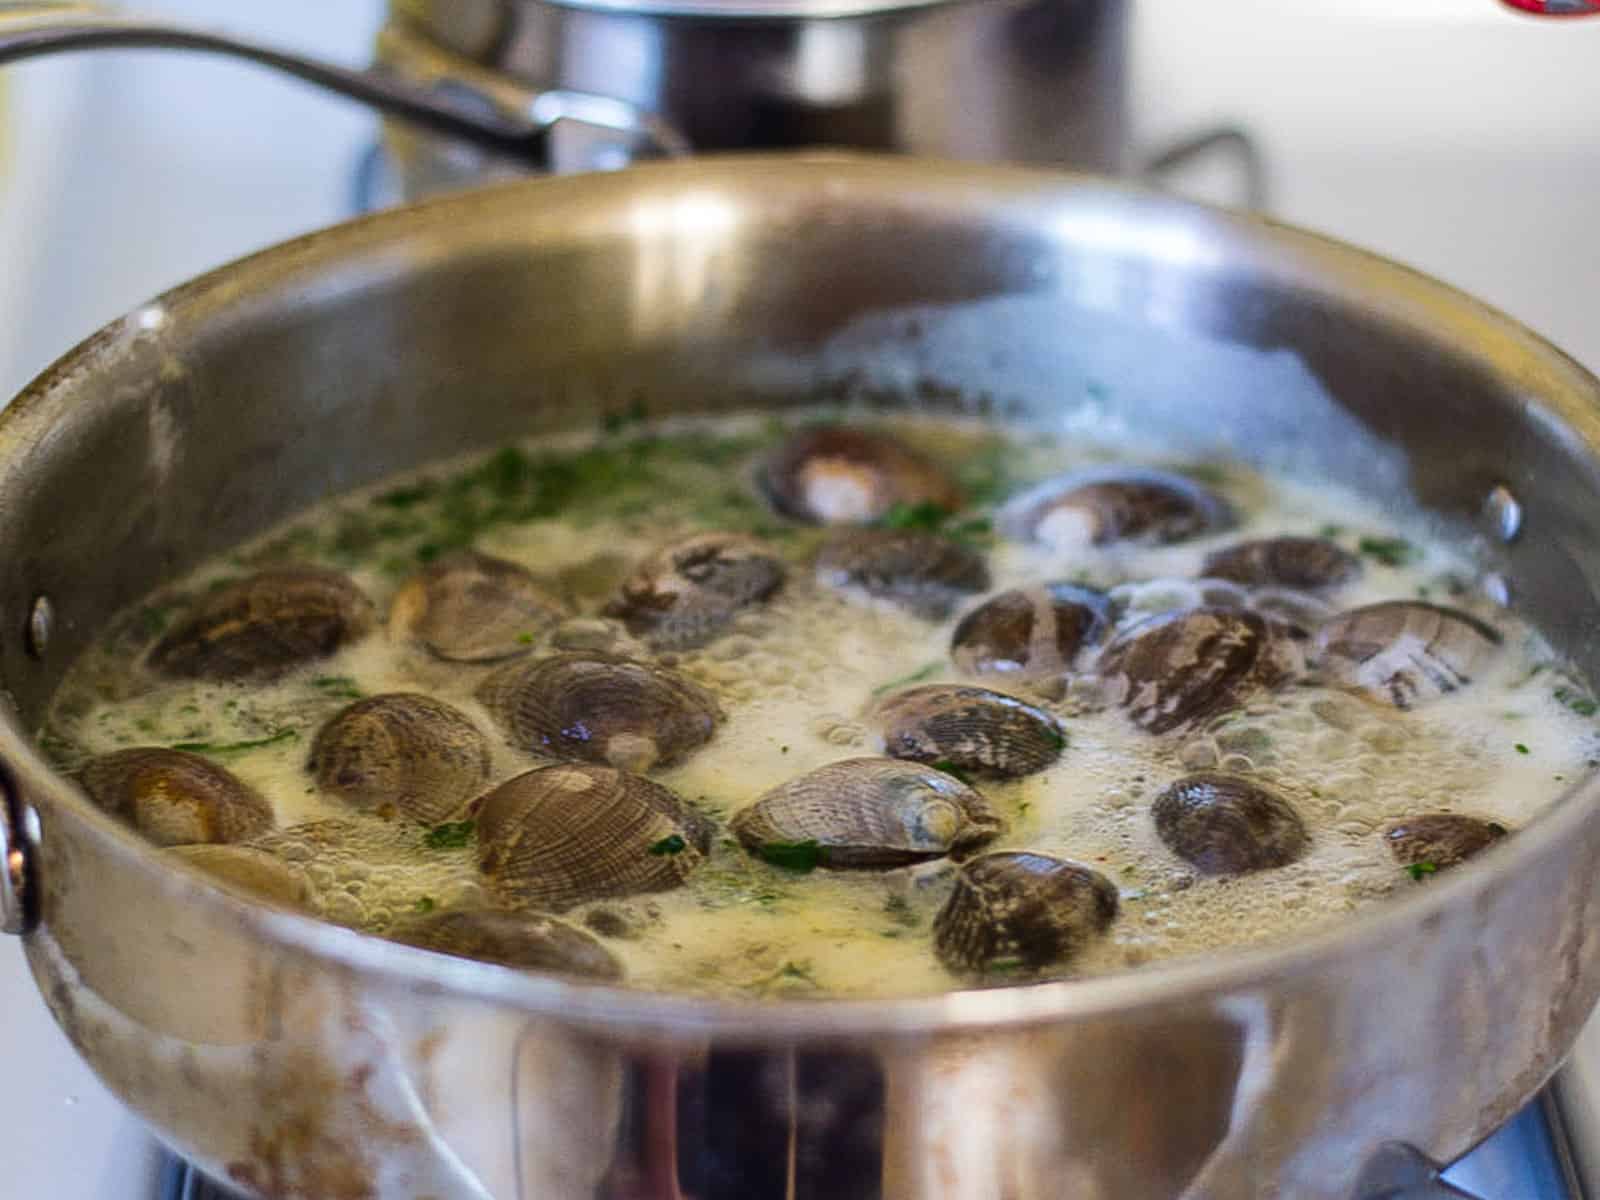 Steam clams in the salsa verde until they just open.